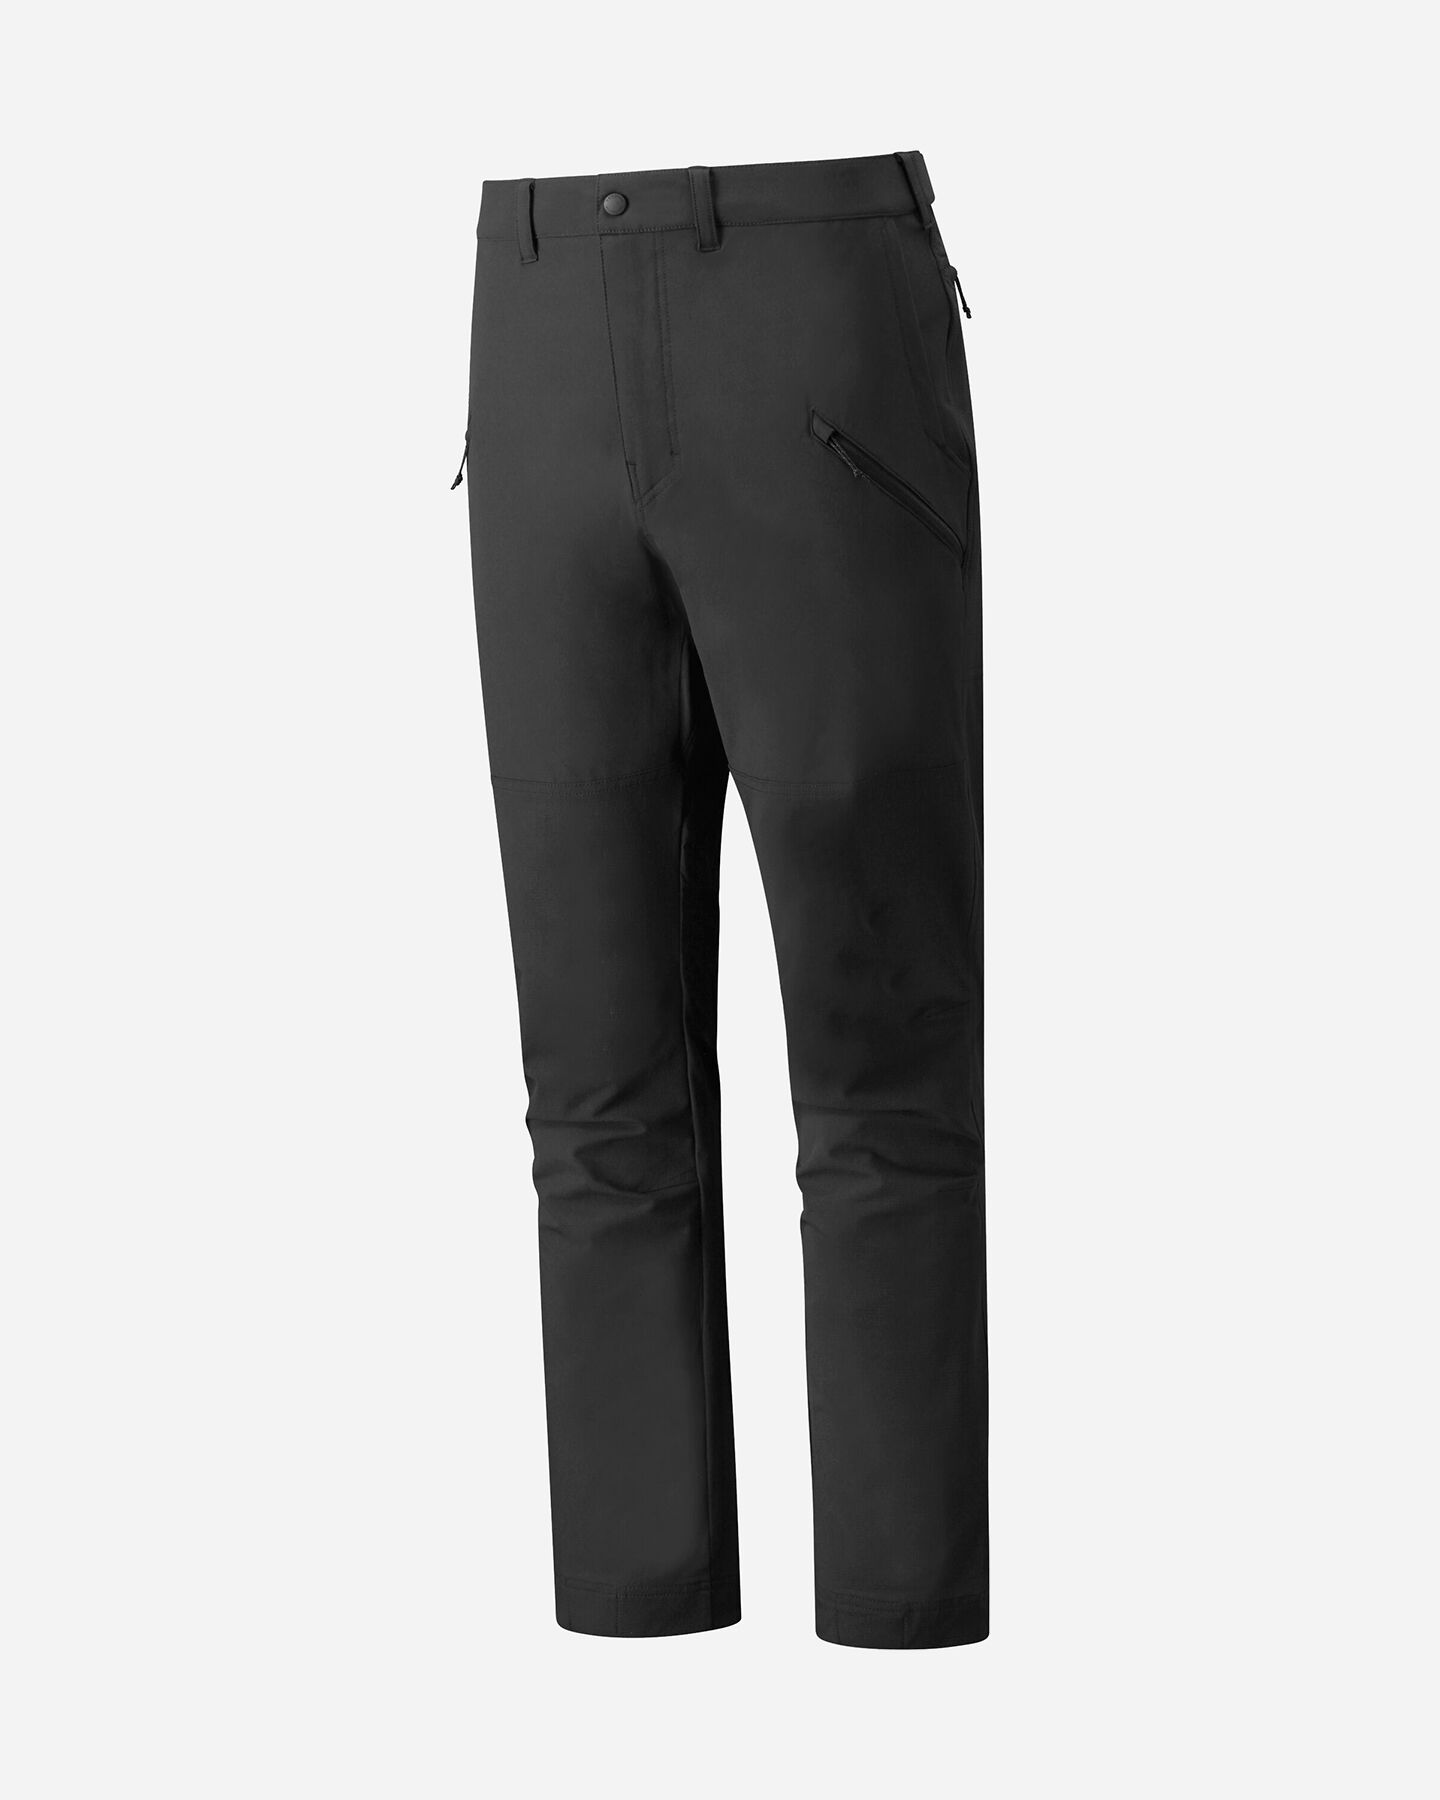  Pantalone outdoor PATAGONIA POINT PEAK TRAIL M S4097087|BLK|34 scatto 5